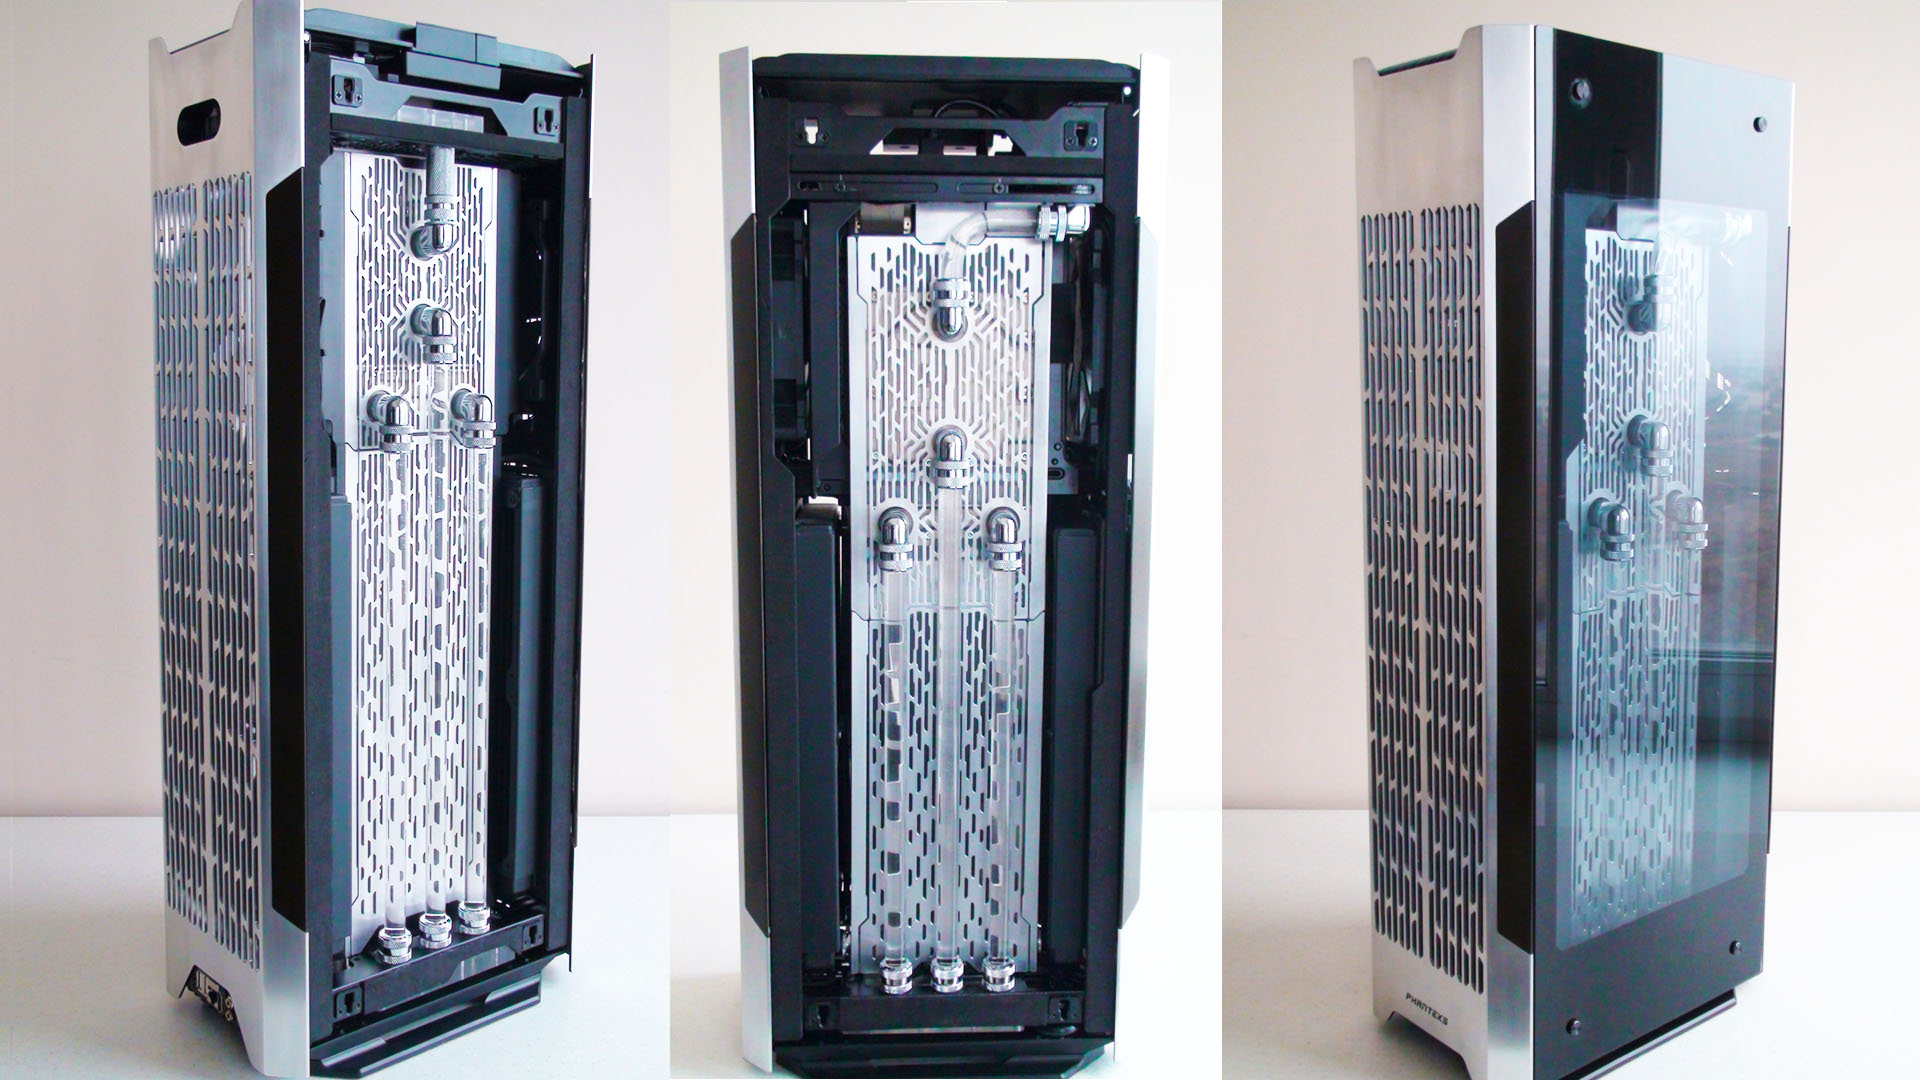 This symmetrical gaming PC was made with a handmade CNC machine